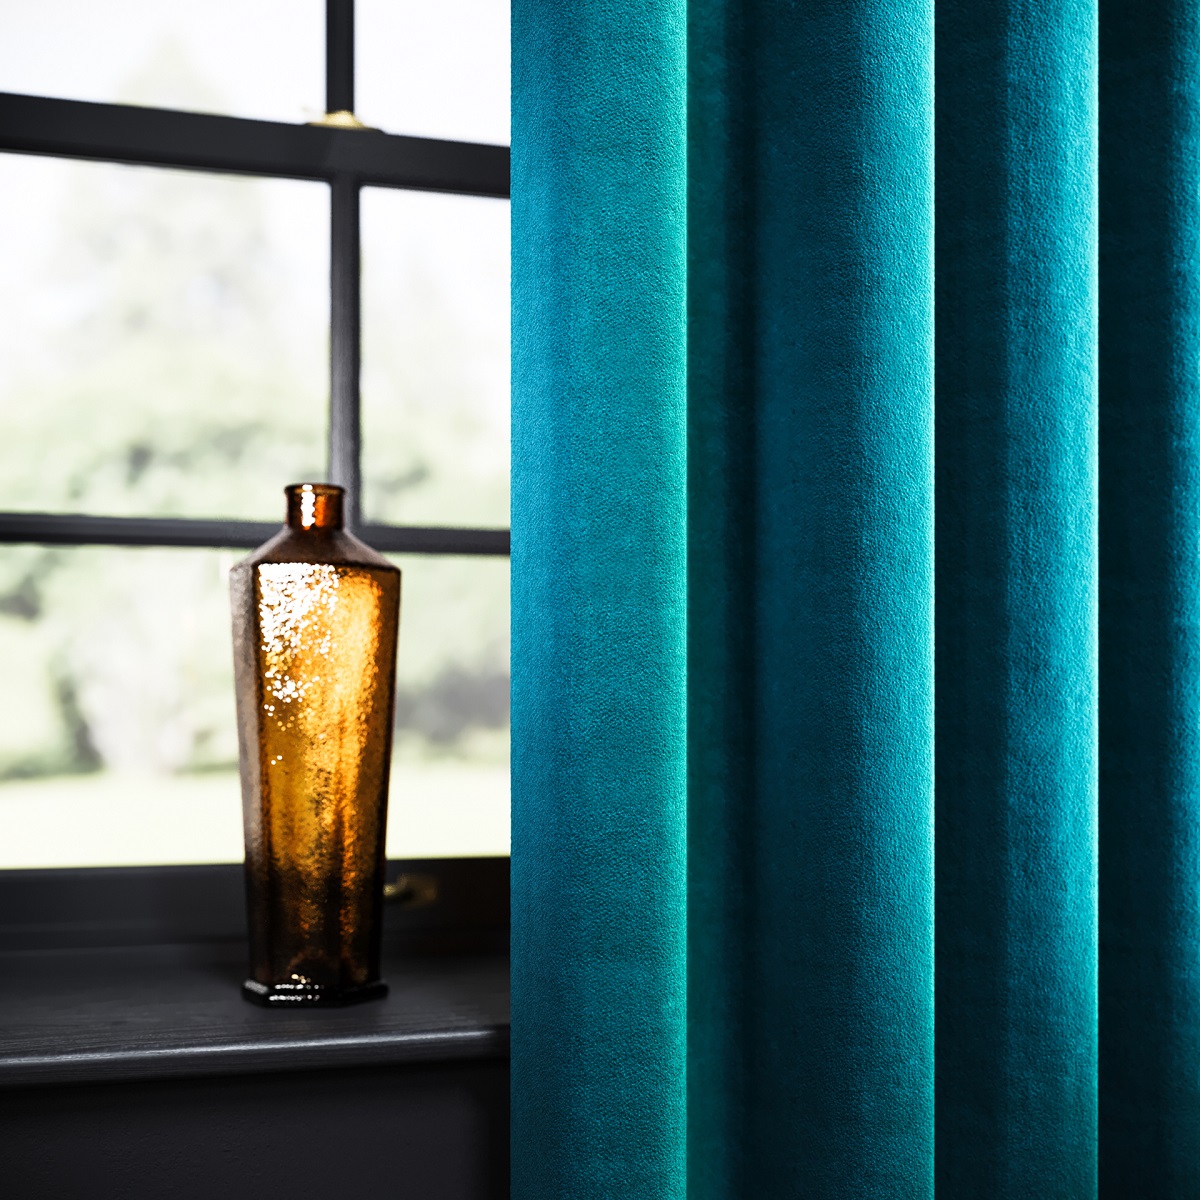 Brookland fabric in teal curtain drape in window setting with amber glass vase